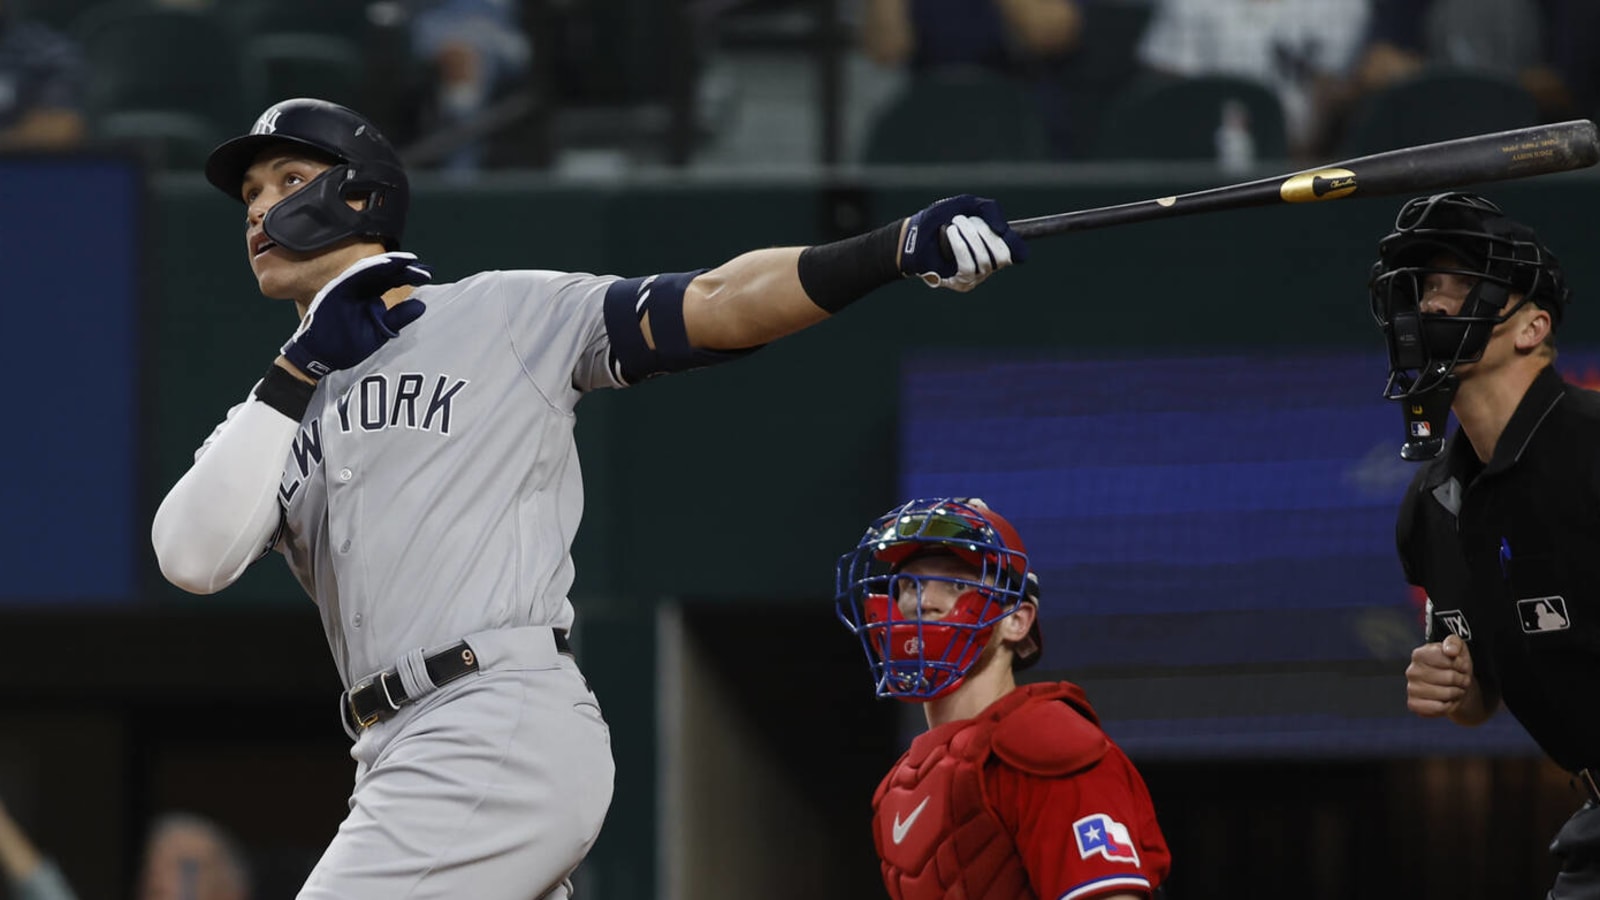 Bat, uniform from Judge's 62nd HR may be worth $1M